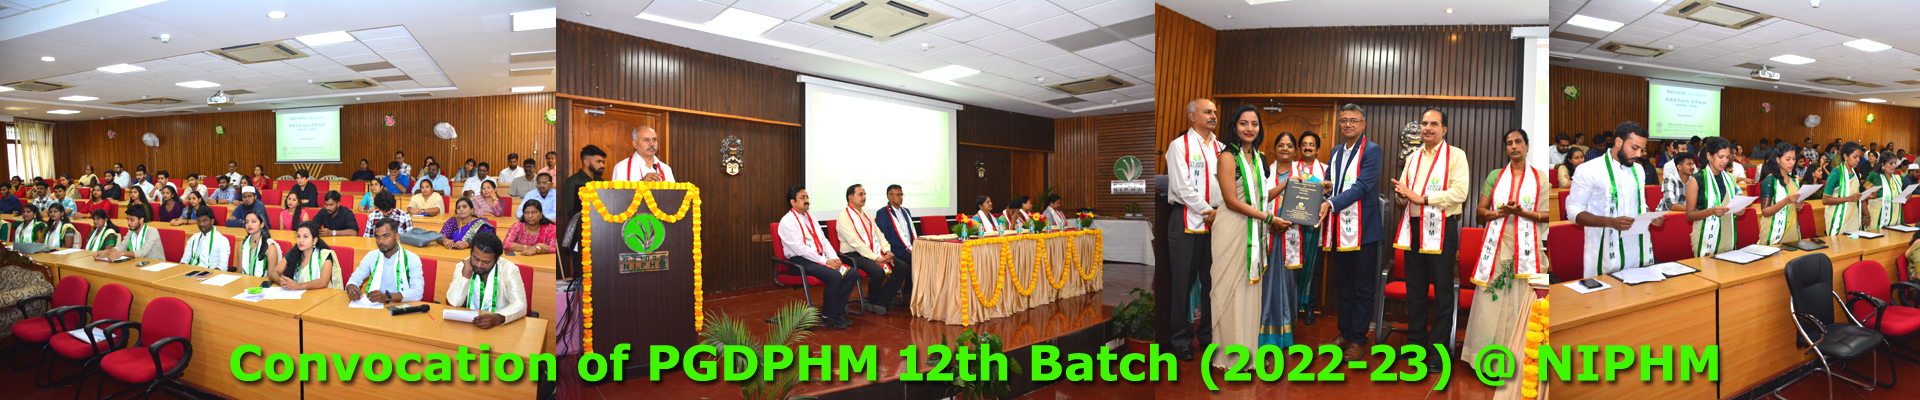 Convocation of PGDPHM 12th Batch (2022-23) @ NIPHM